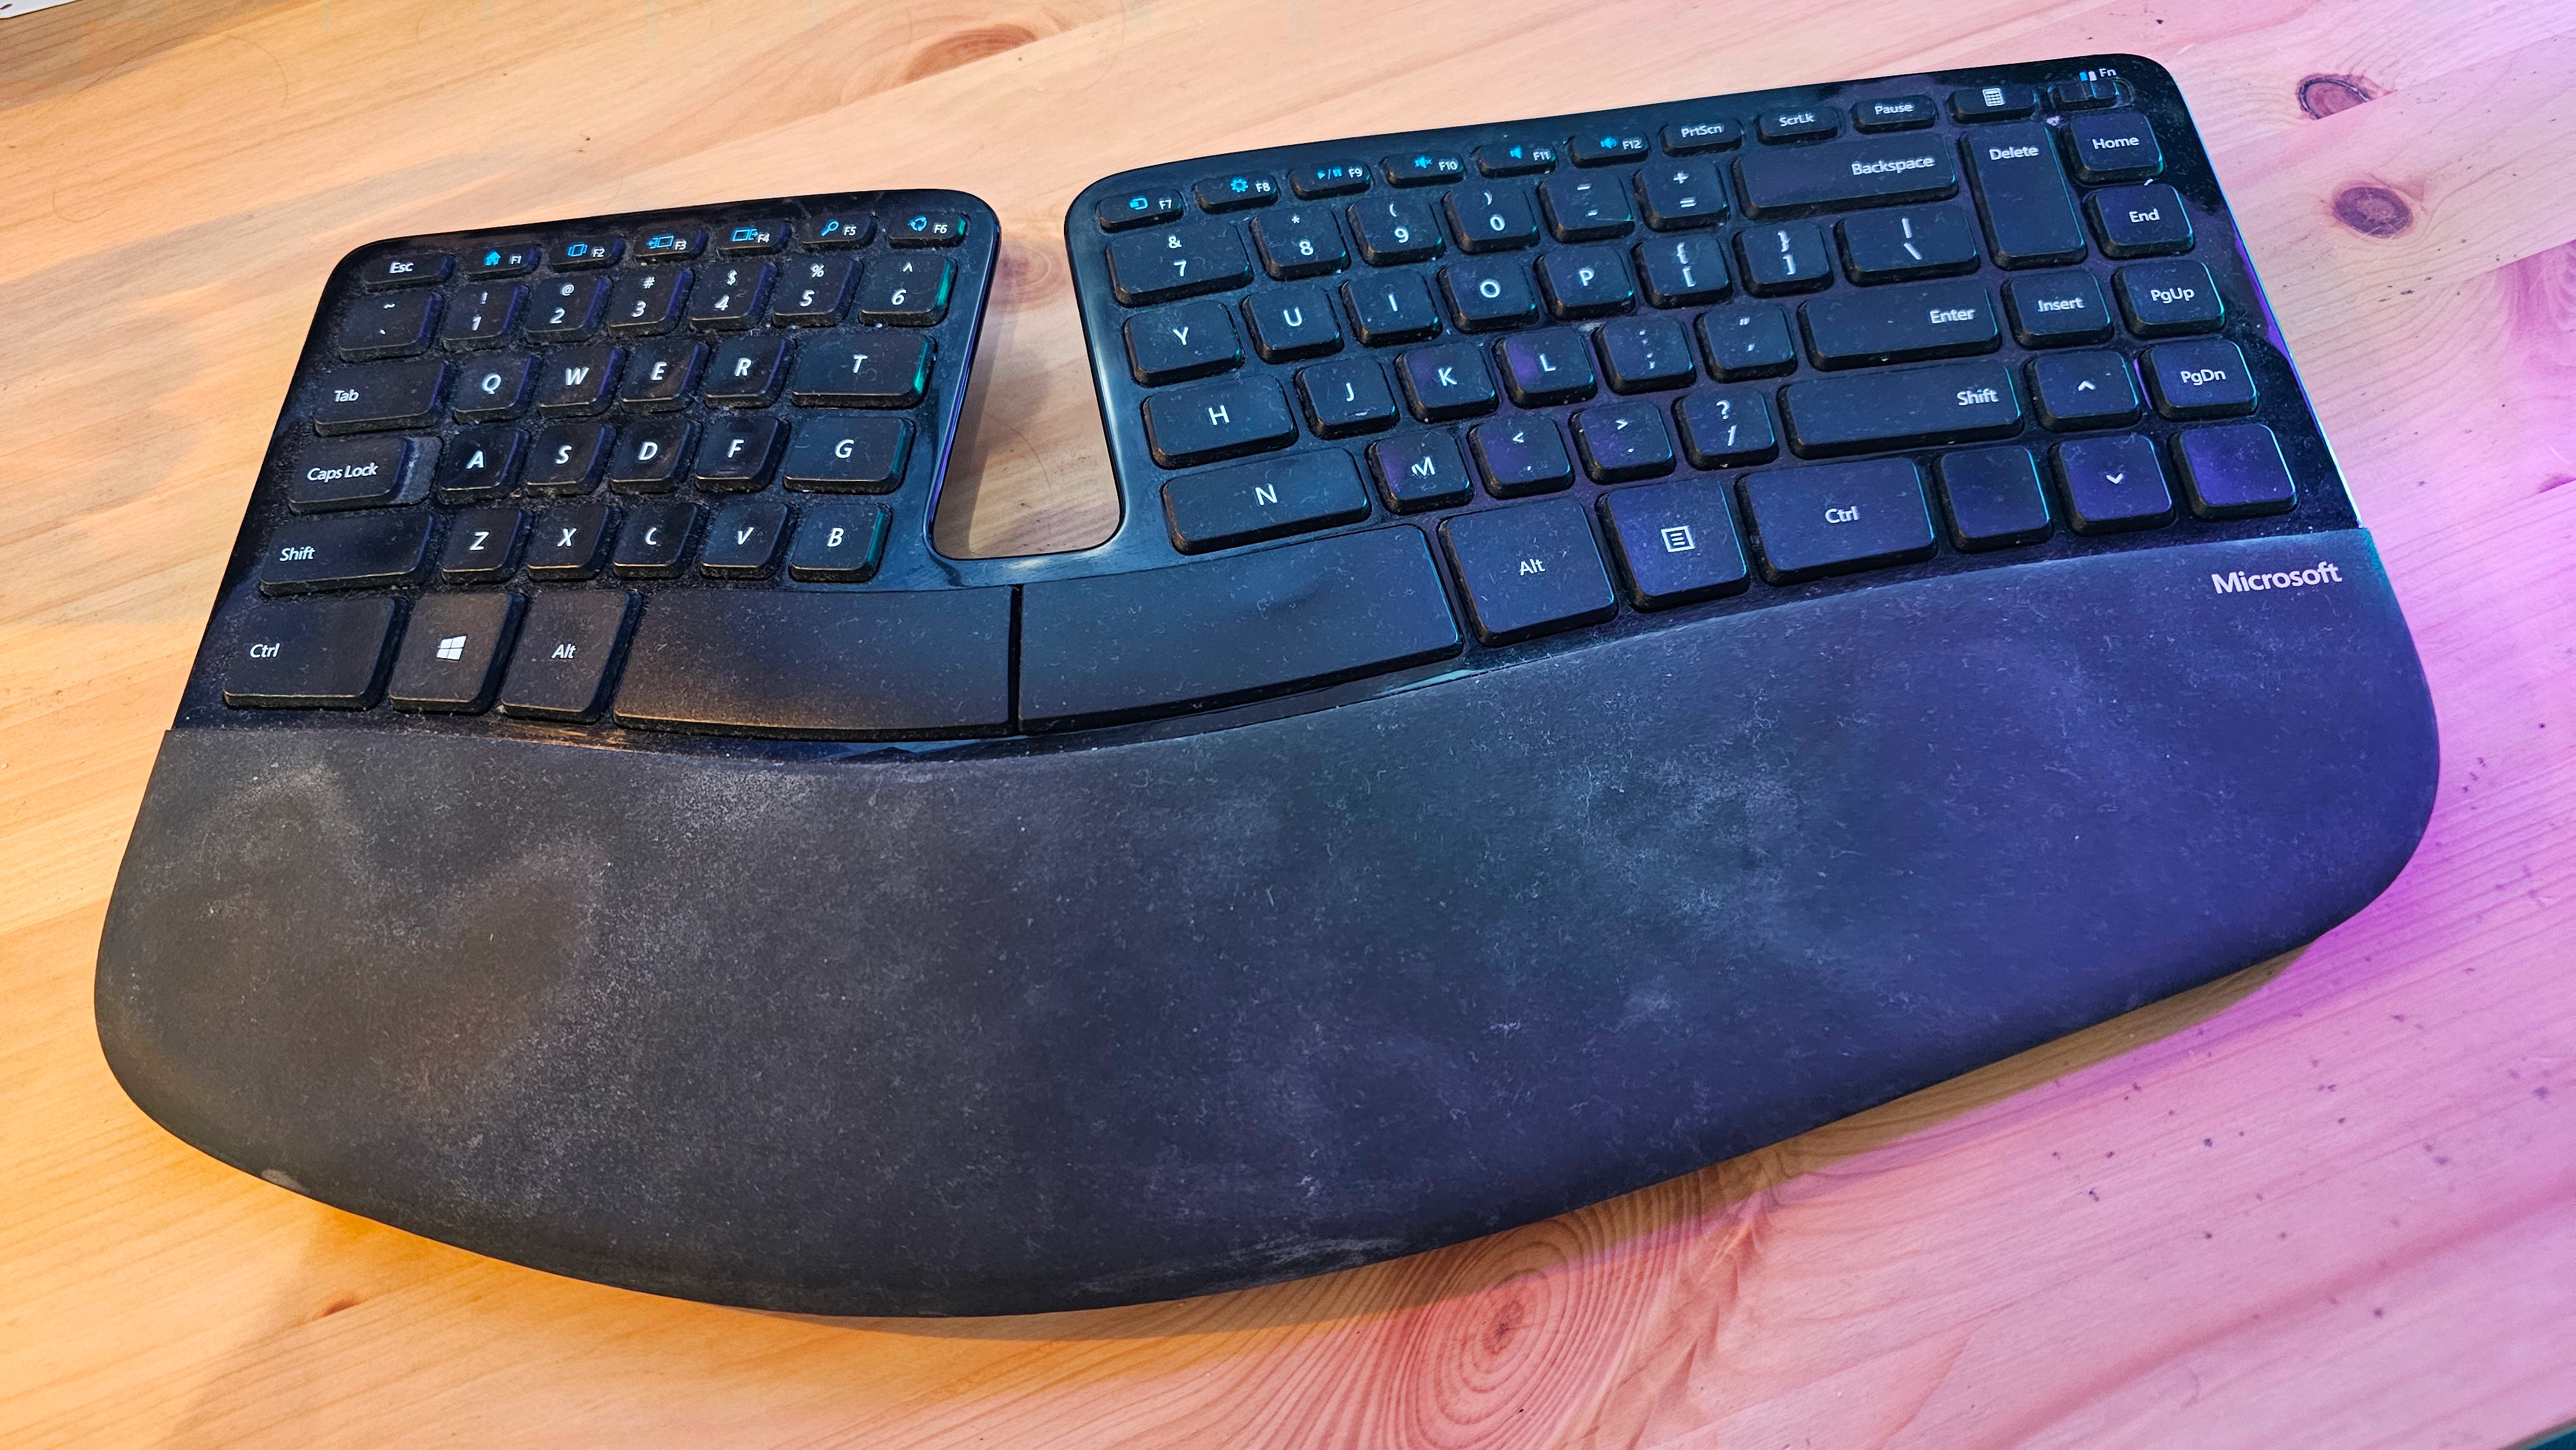 Microsoft killed my favorite keyboard and I'm mad about it